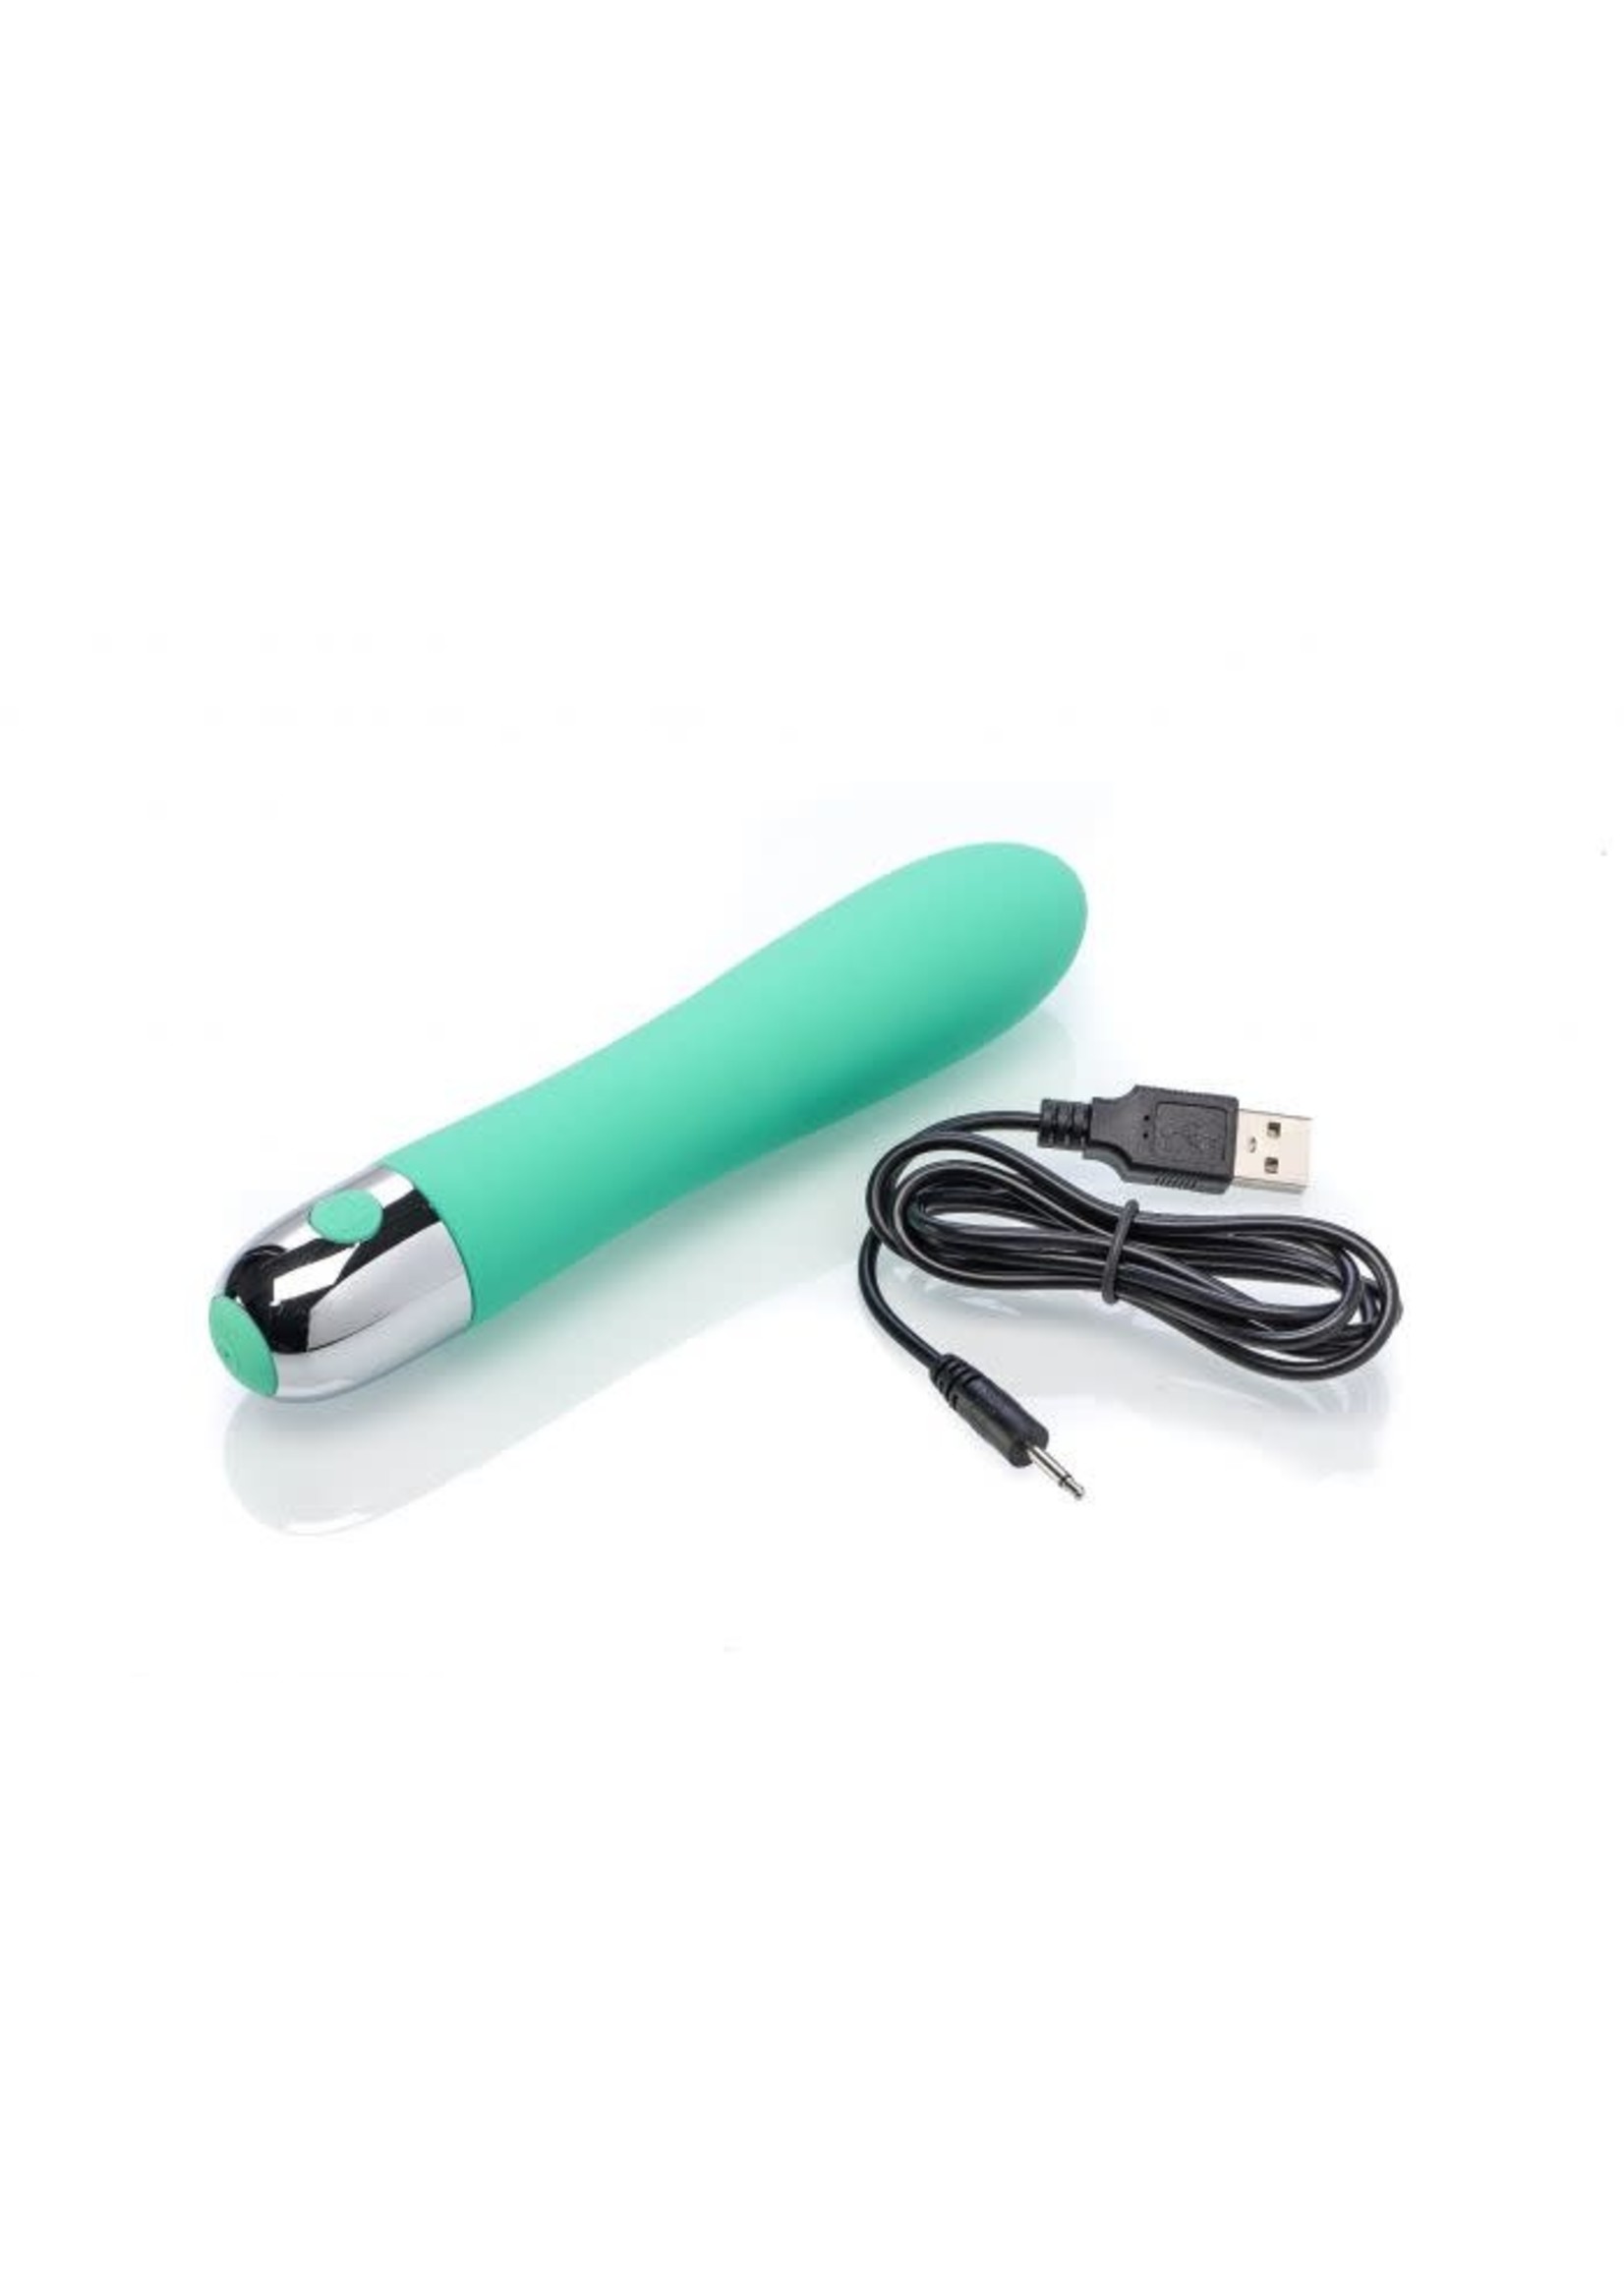 ZennToys The super soft one - two powerful motors